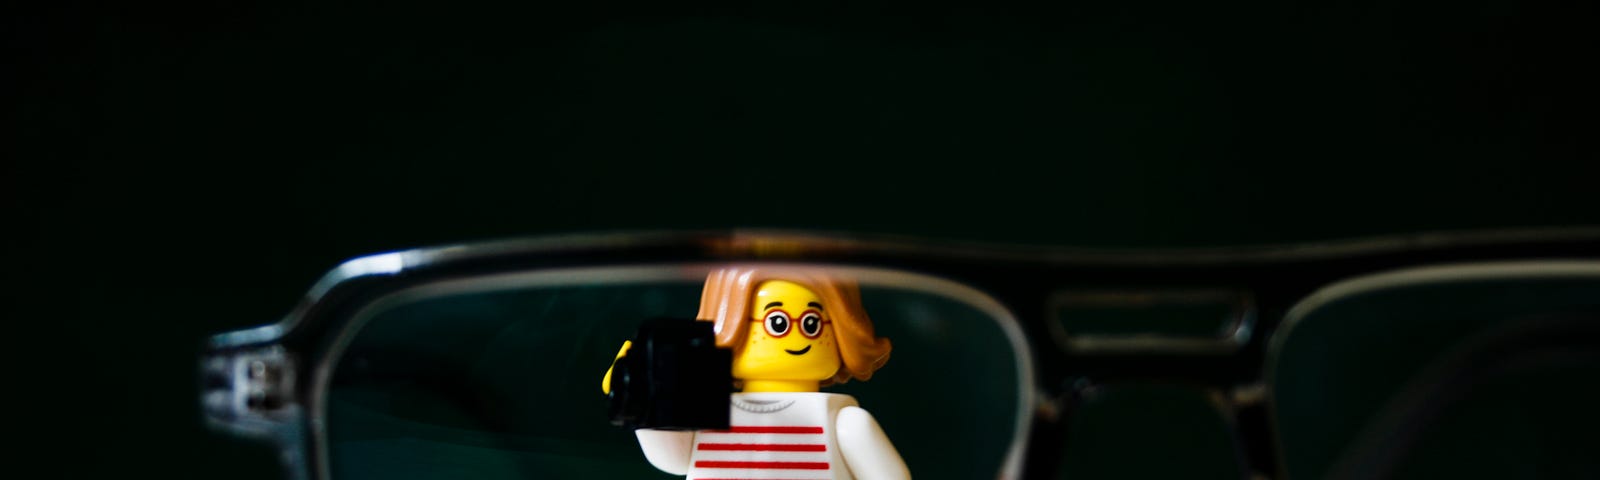 image of a lego character who is standing behind a pair of glasses